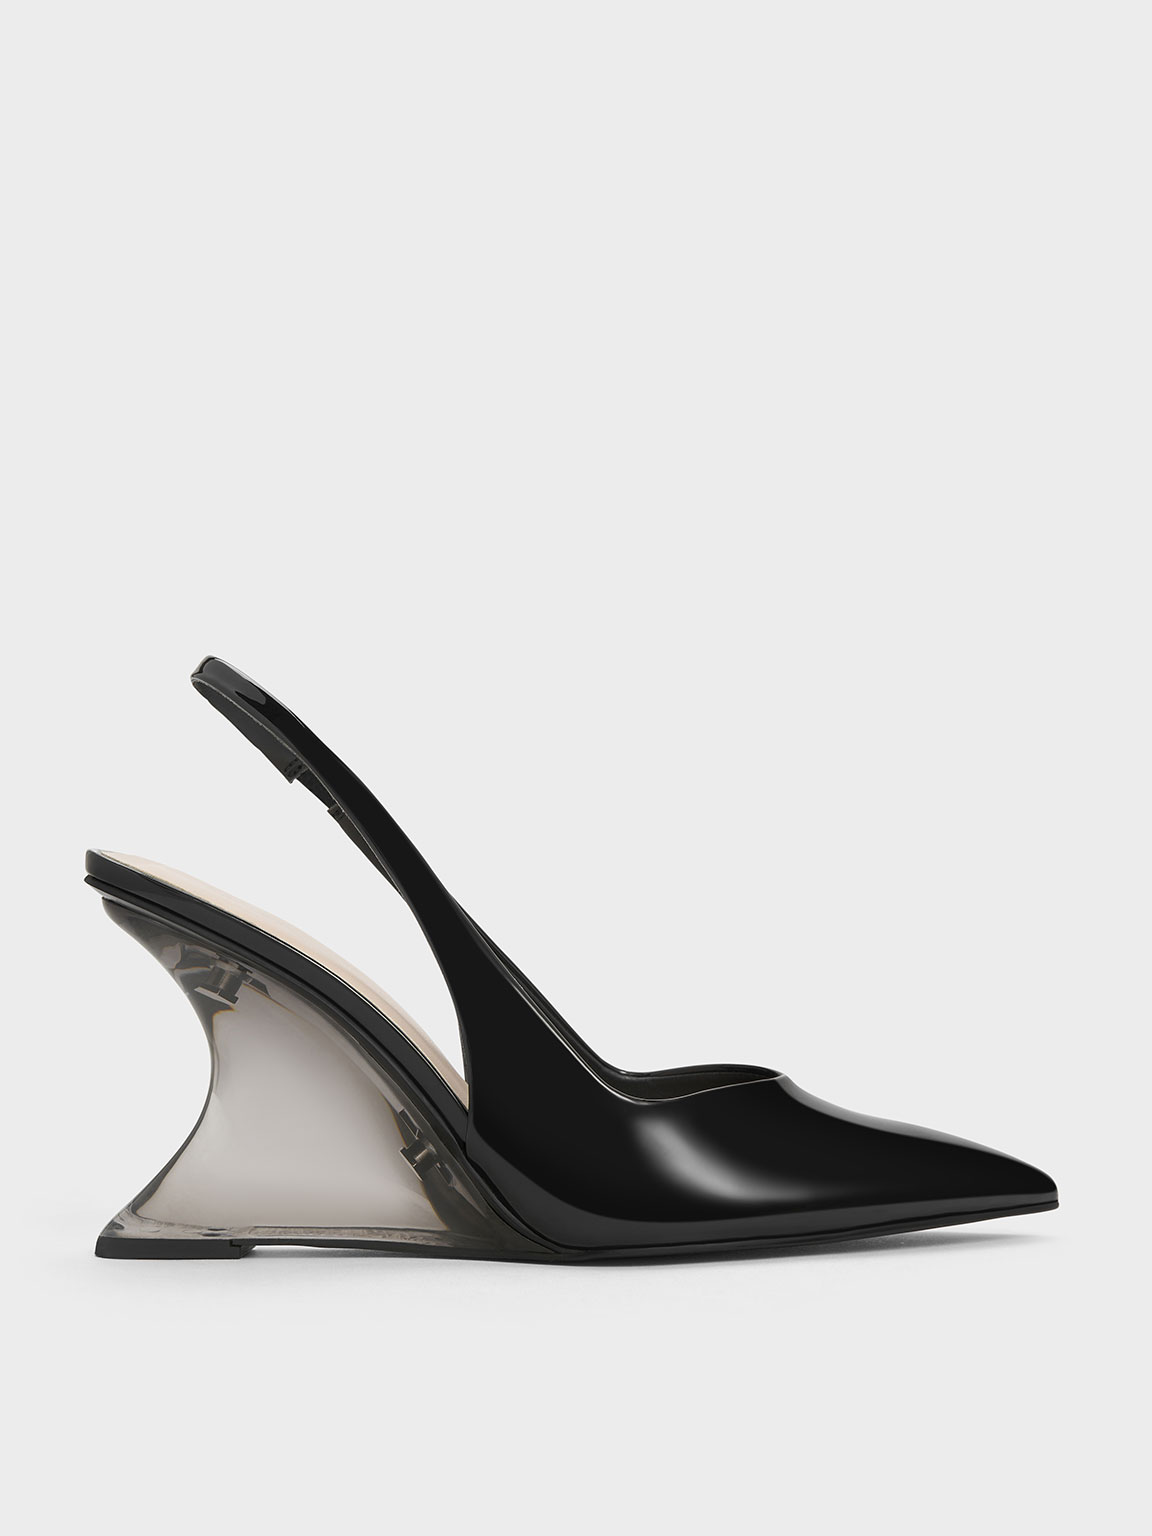 Charles & Keith Patent Sculptural Slingback Wedges In Black Patent